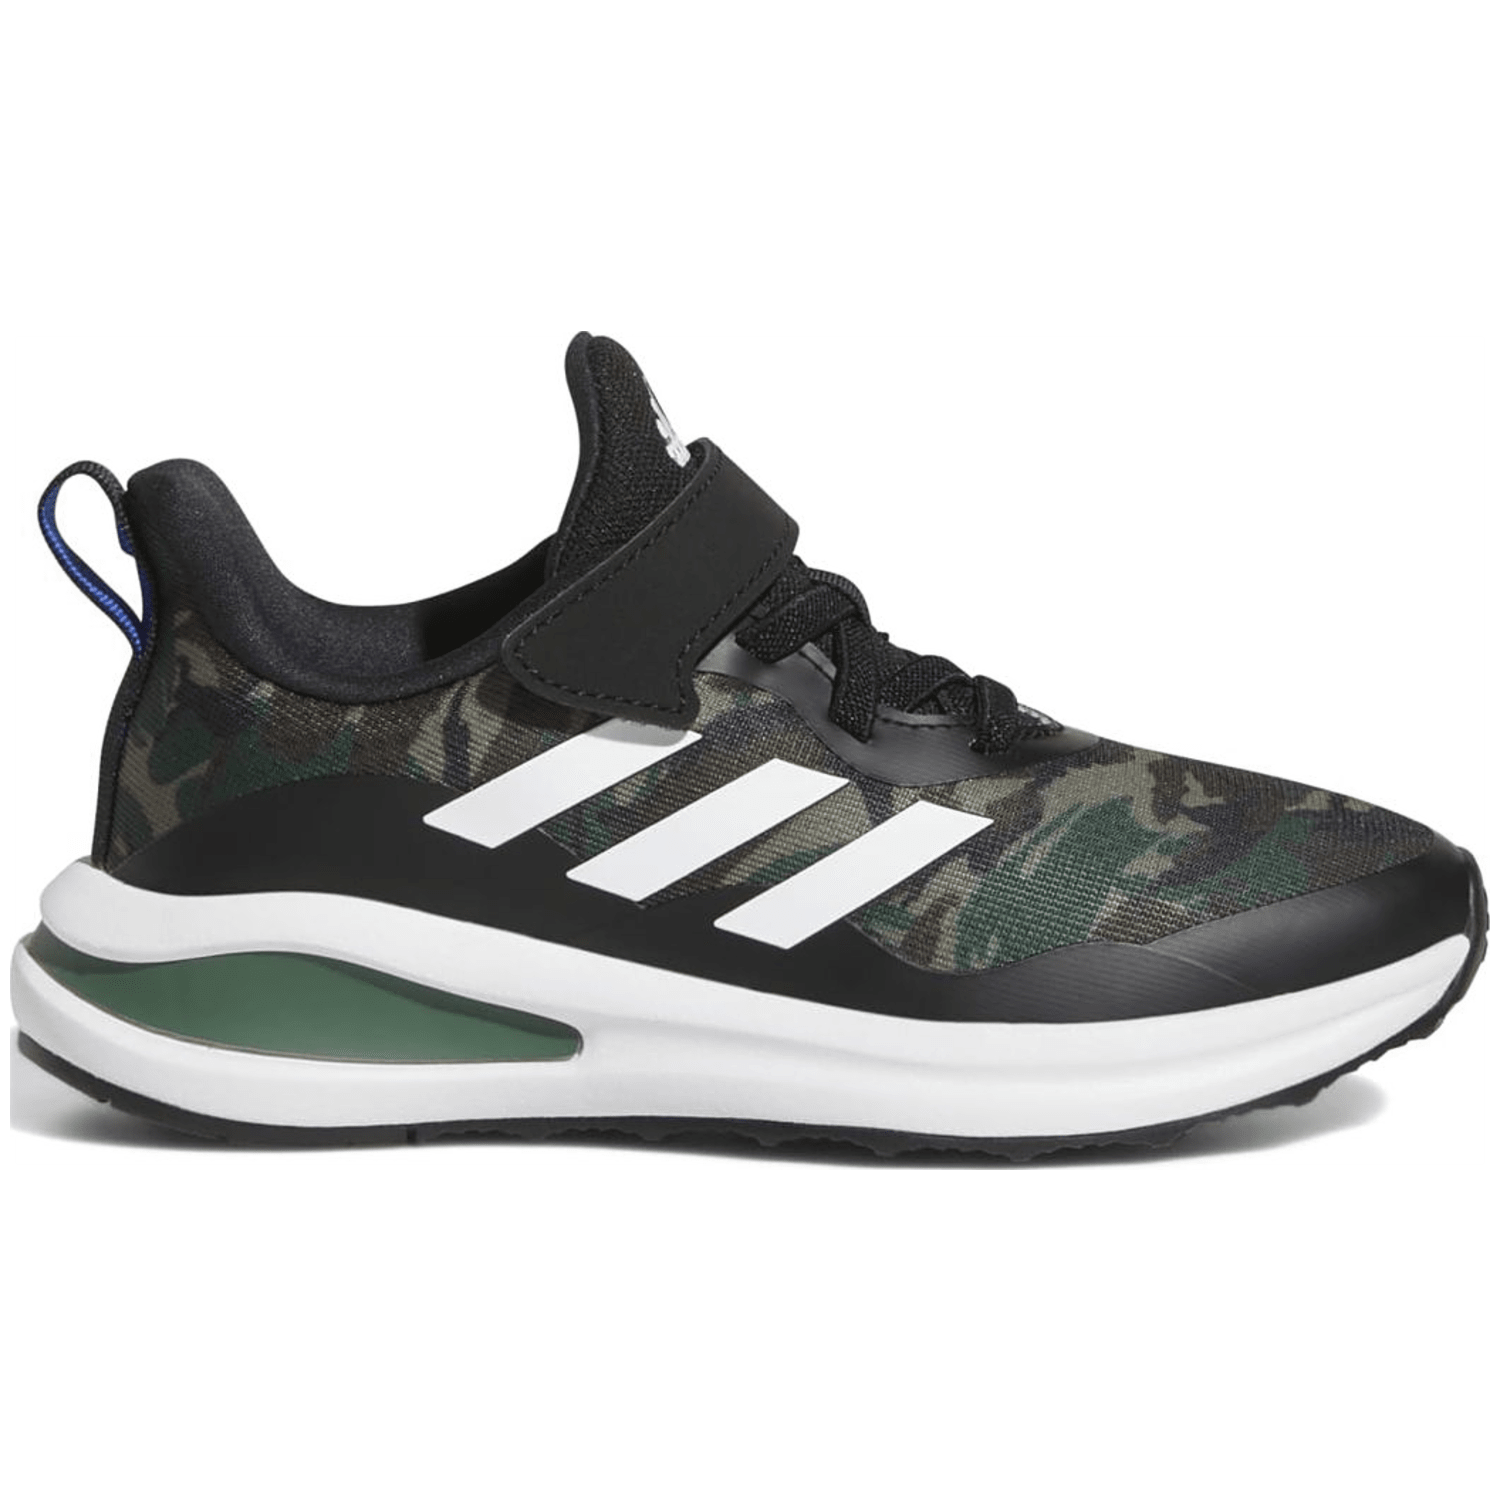 Adidas FortaRun Sport Running Lace and Top Strap Laufschuh Kinder